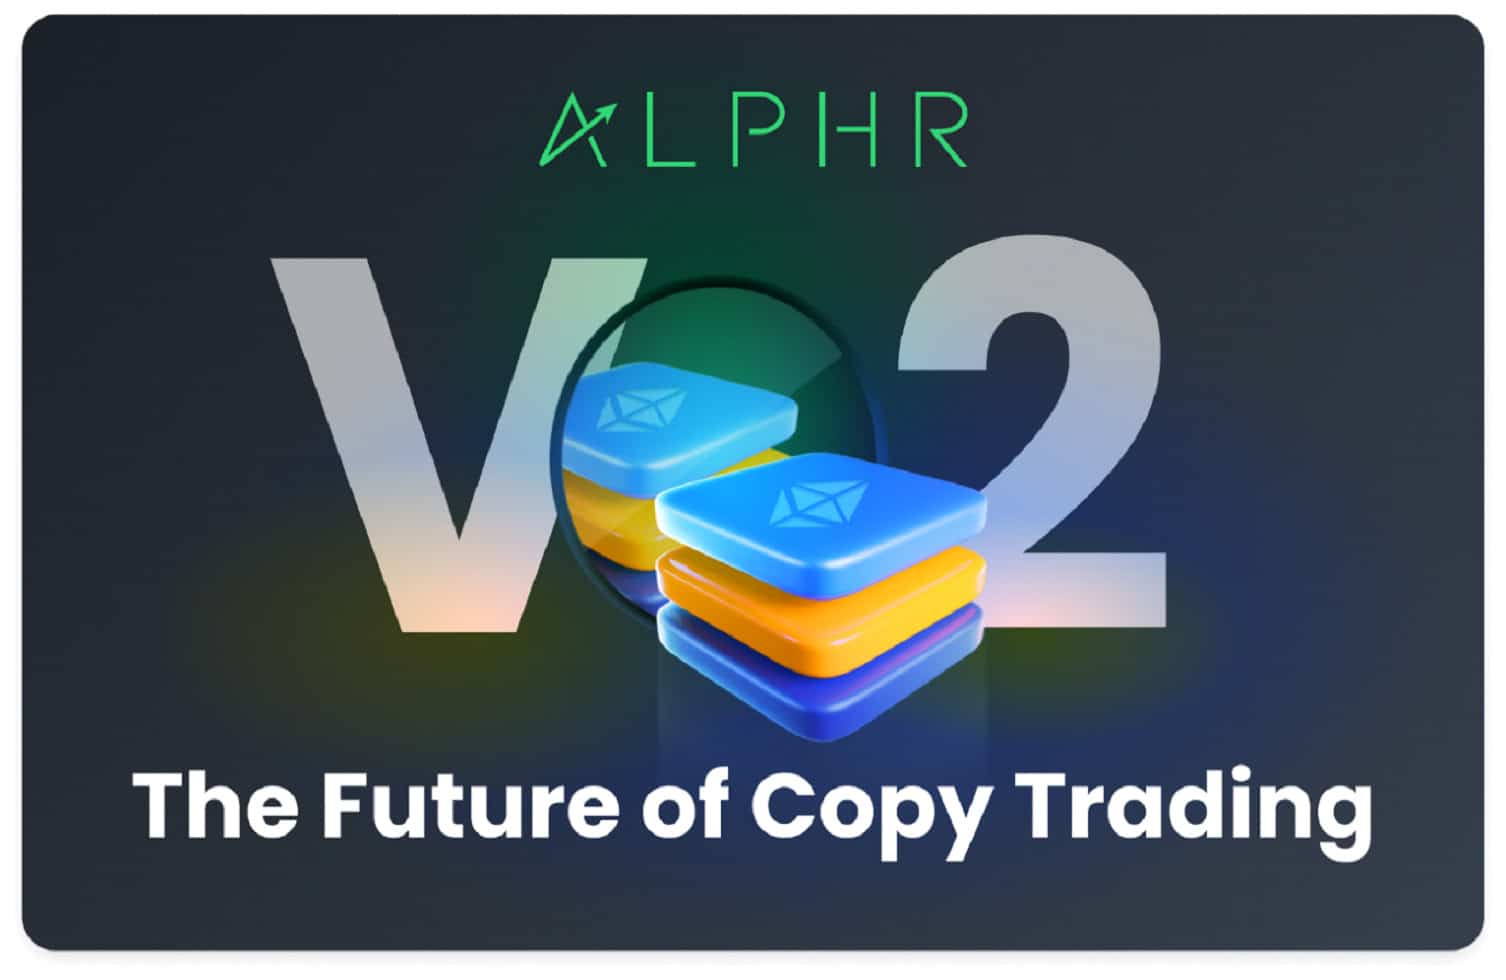 Alphr-to-launch-permissionless-automated-mirror-trading-in-defi